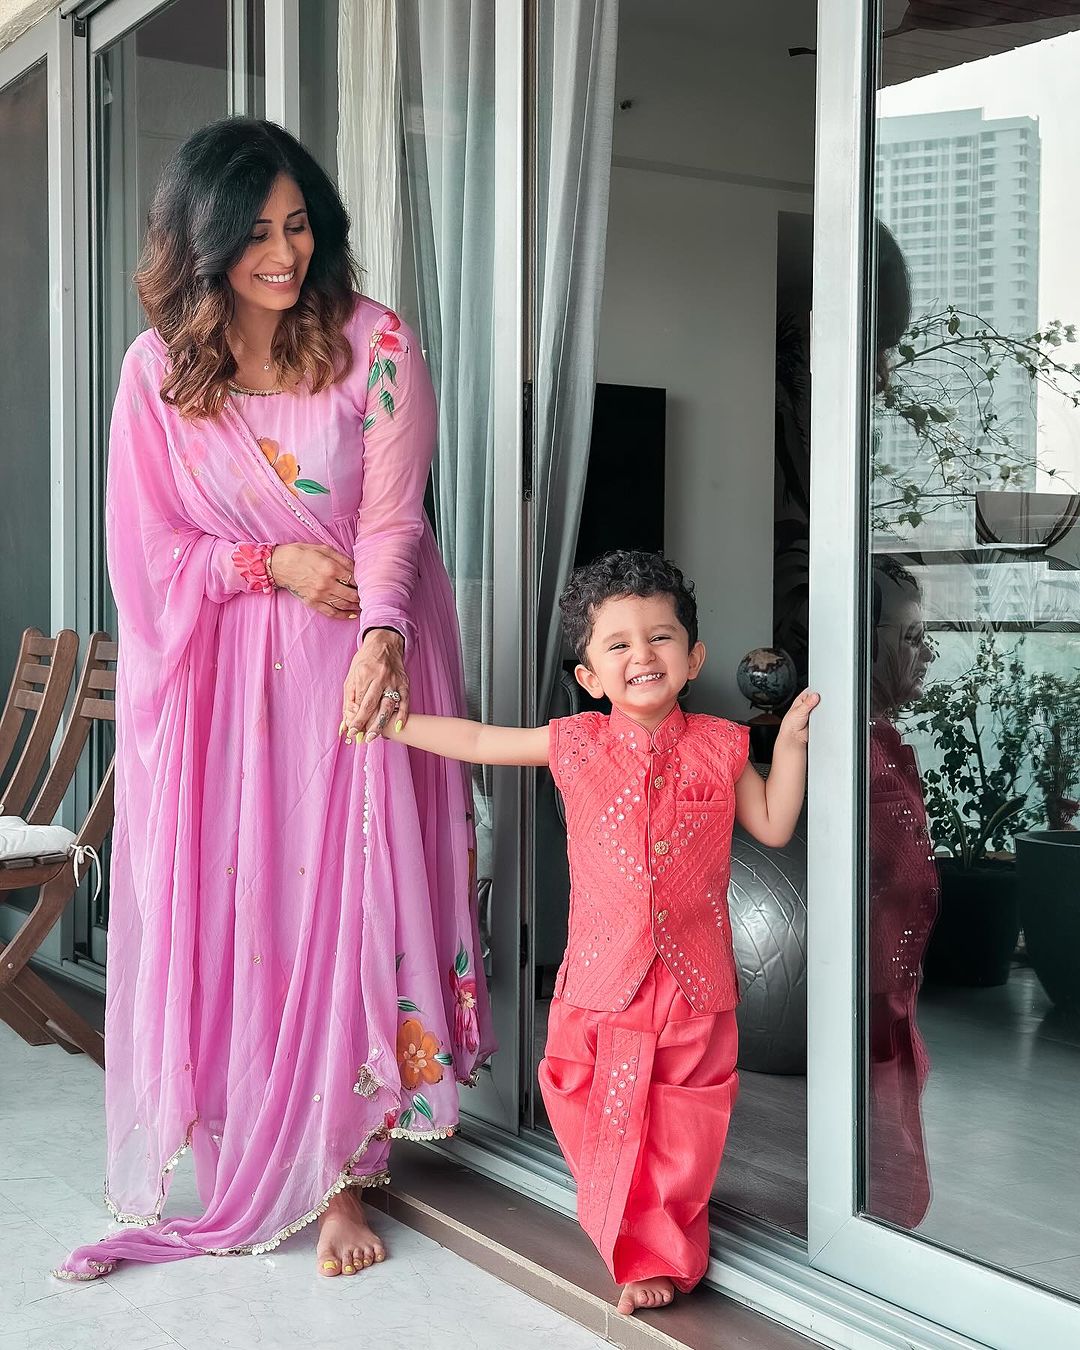 Actress Kishwwer Applied Mehendi For Karwa Chauth Festive Who Looks So Adorable And Cute With Her Son. 